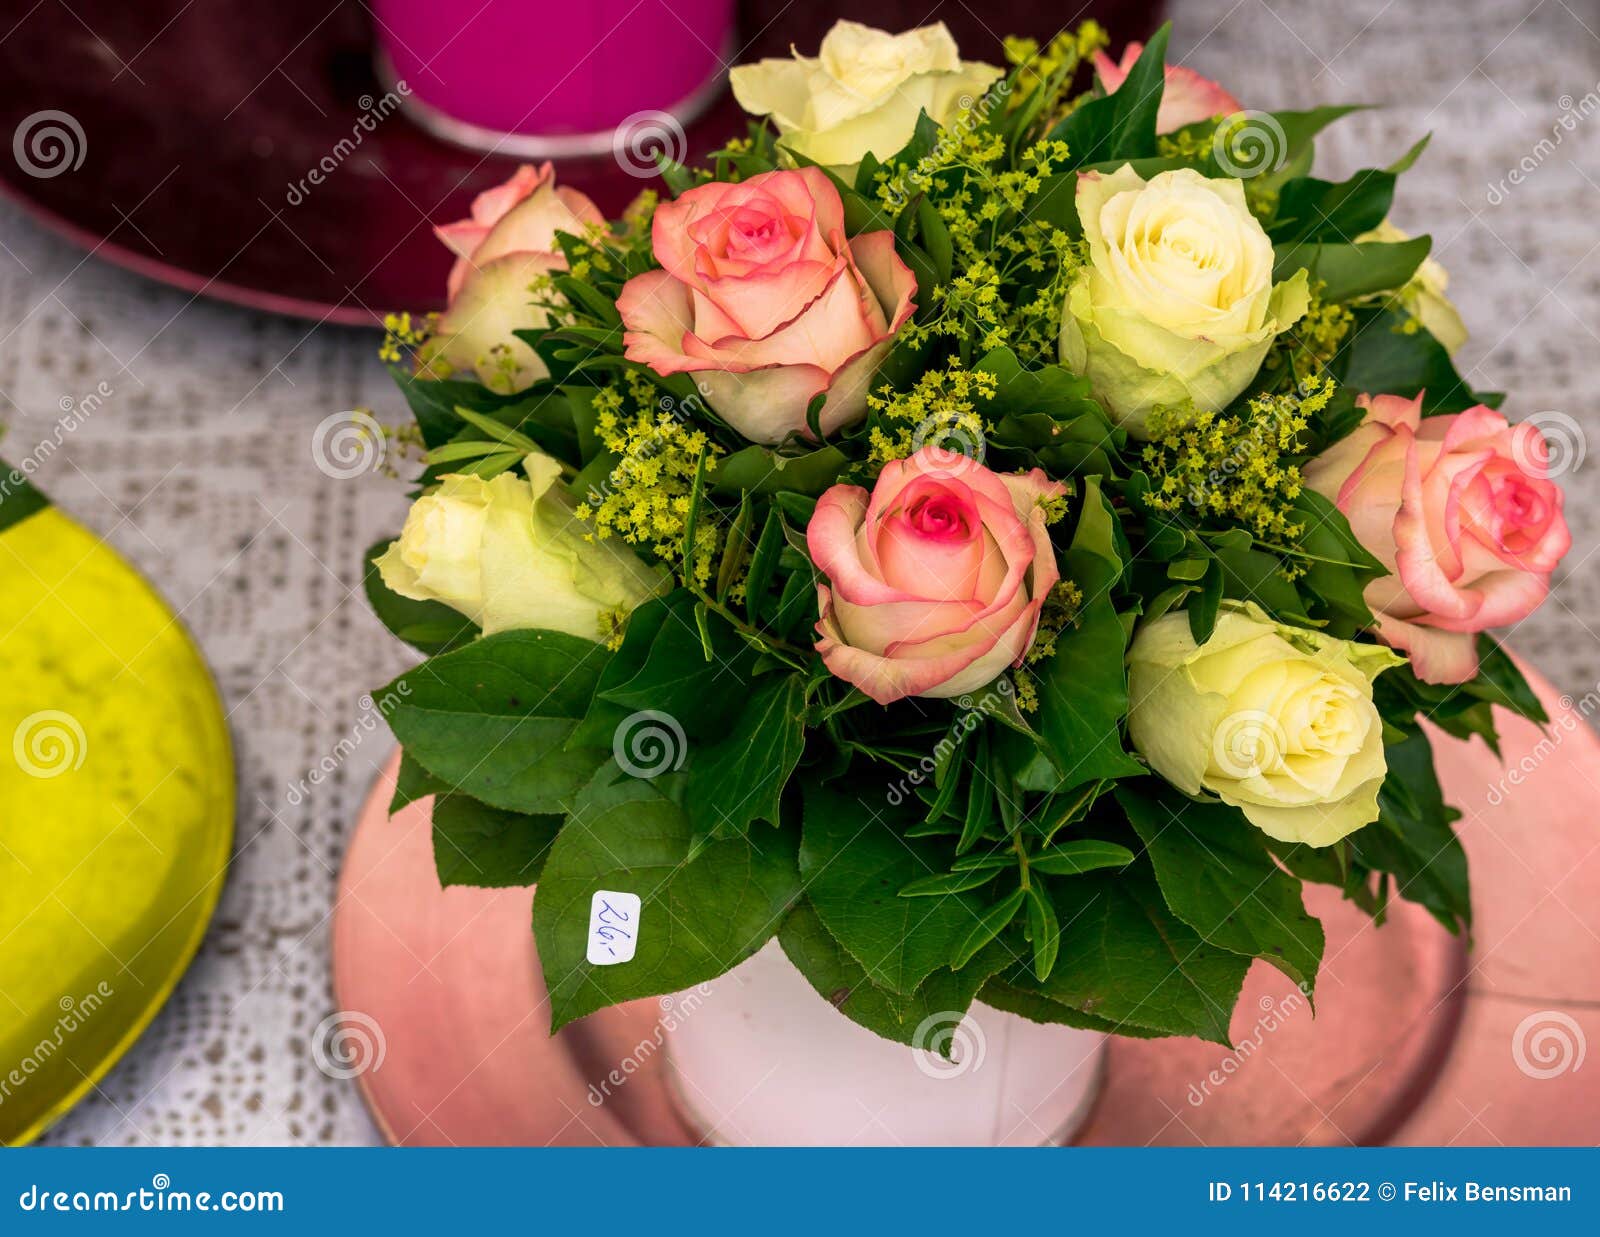 bouquet of different color roses stock photo - image of sale